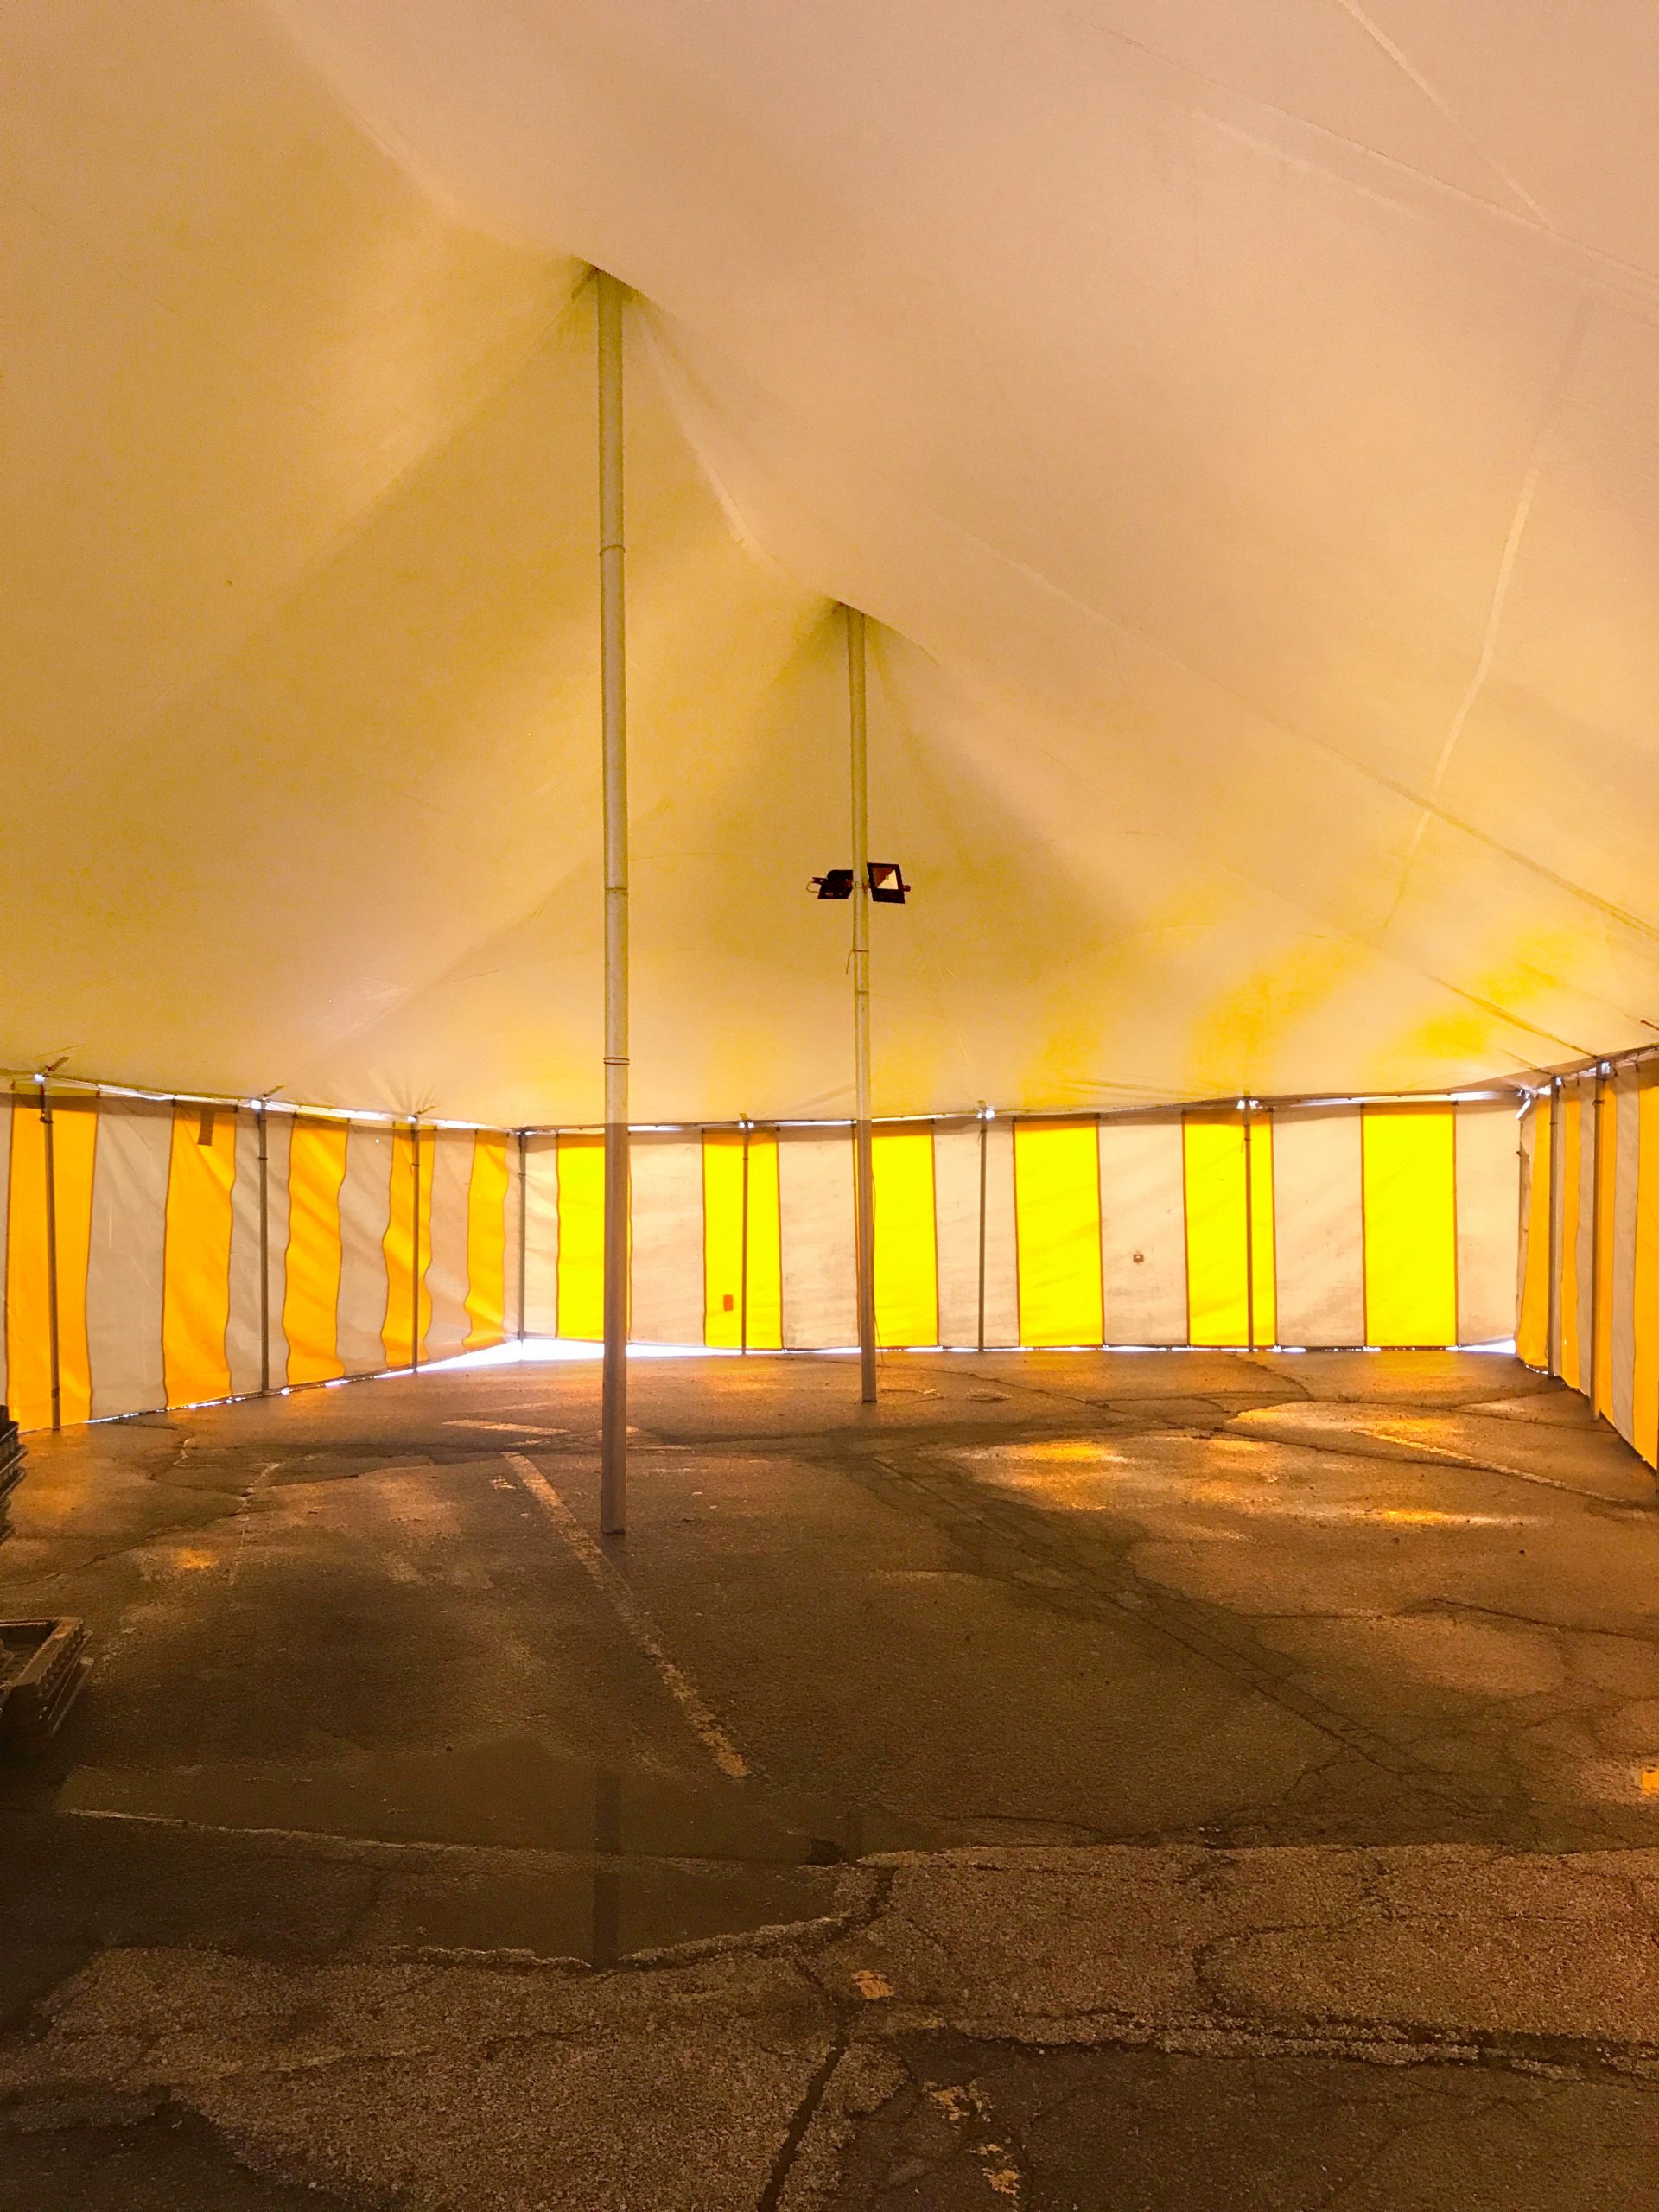 Under a 30' x 60' rope and pole tent for Galaxy Fireworks 3801 1st Ave SE, Cedar Rapids, Iowa